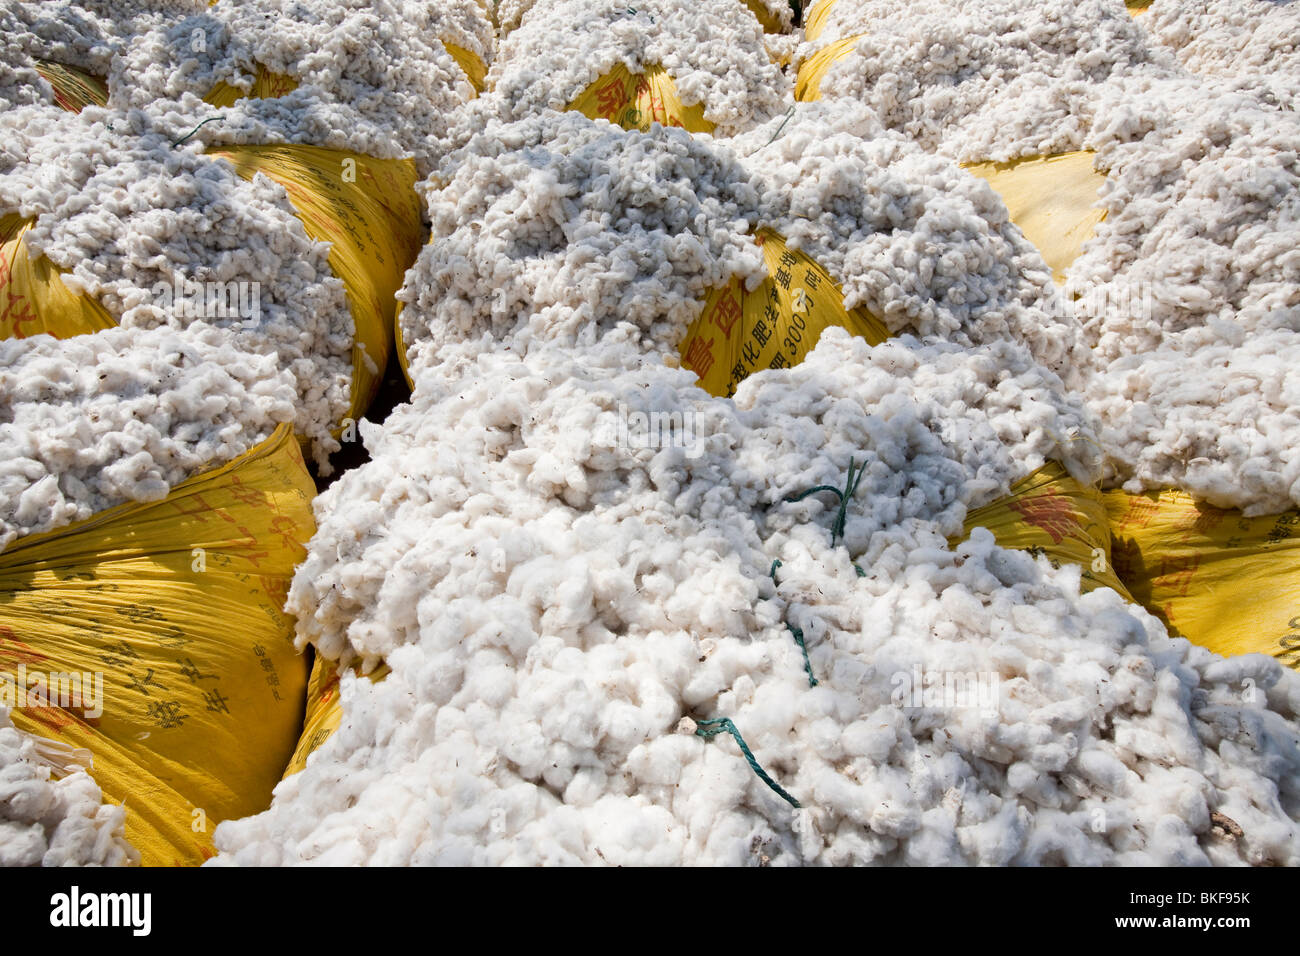 Cotton crops in northern China Stock Photo